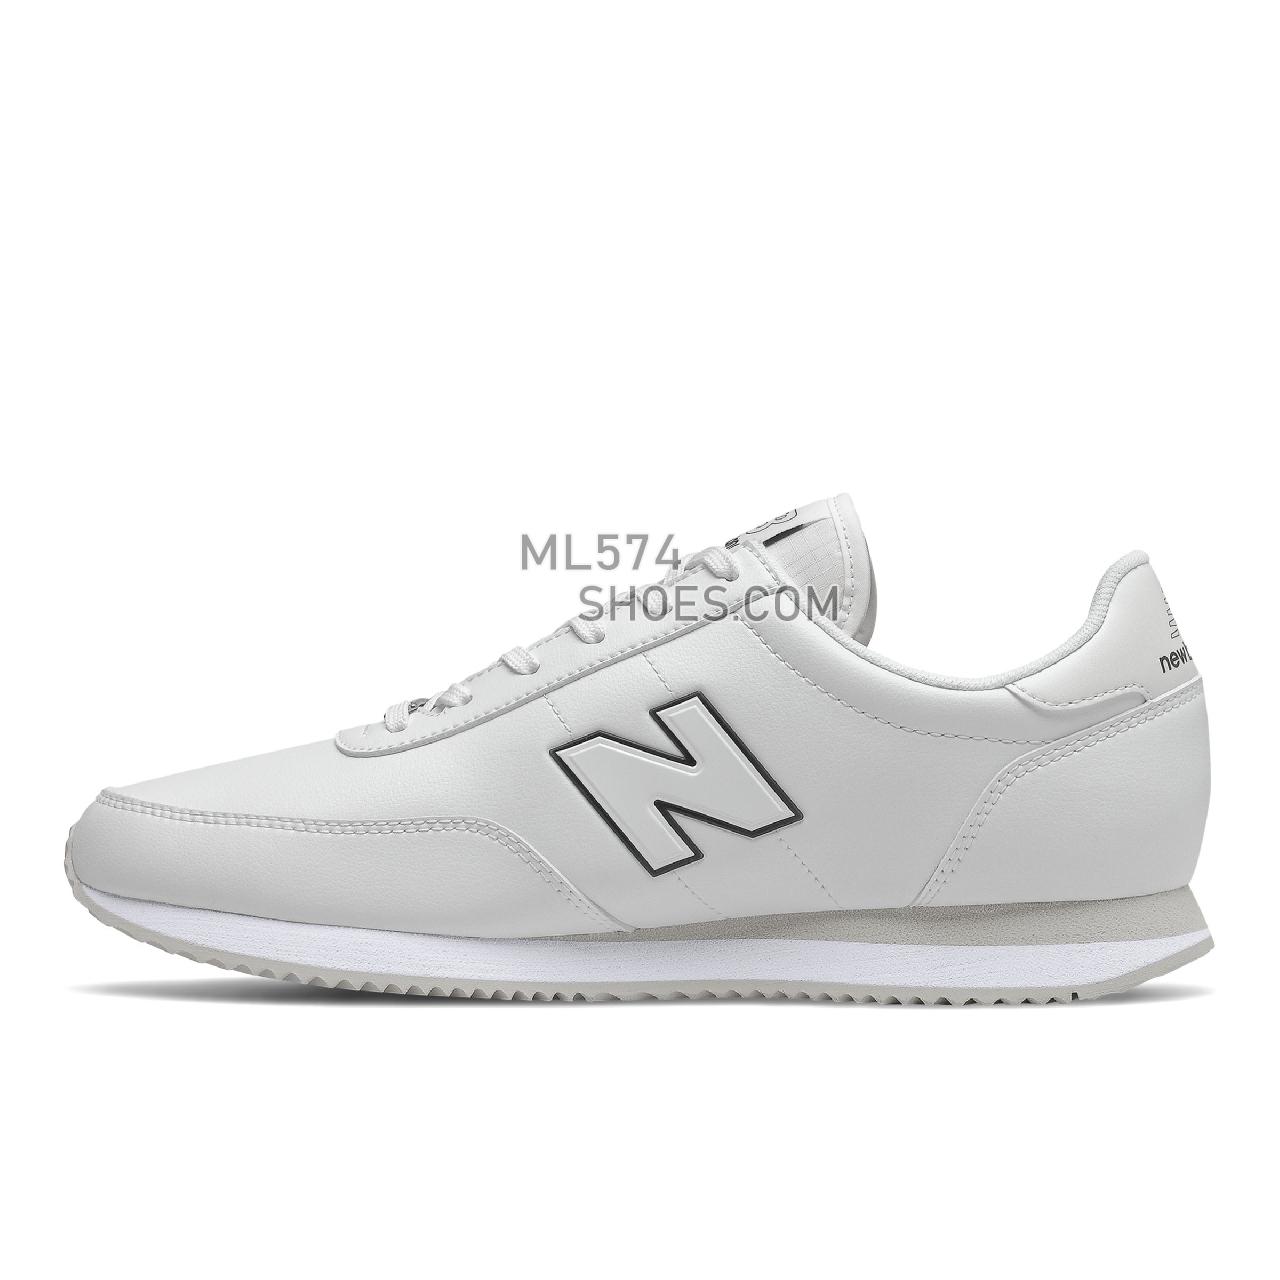 New Balance UL720V1 - Unisex Men's Women's Classic Sneakers - Nb White with Natural Indigo - UL720WP1